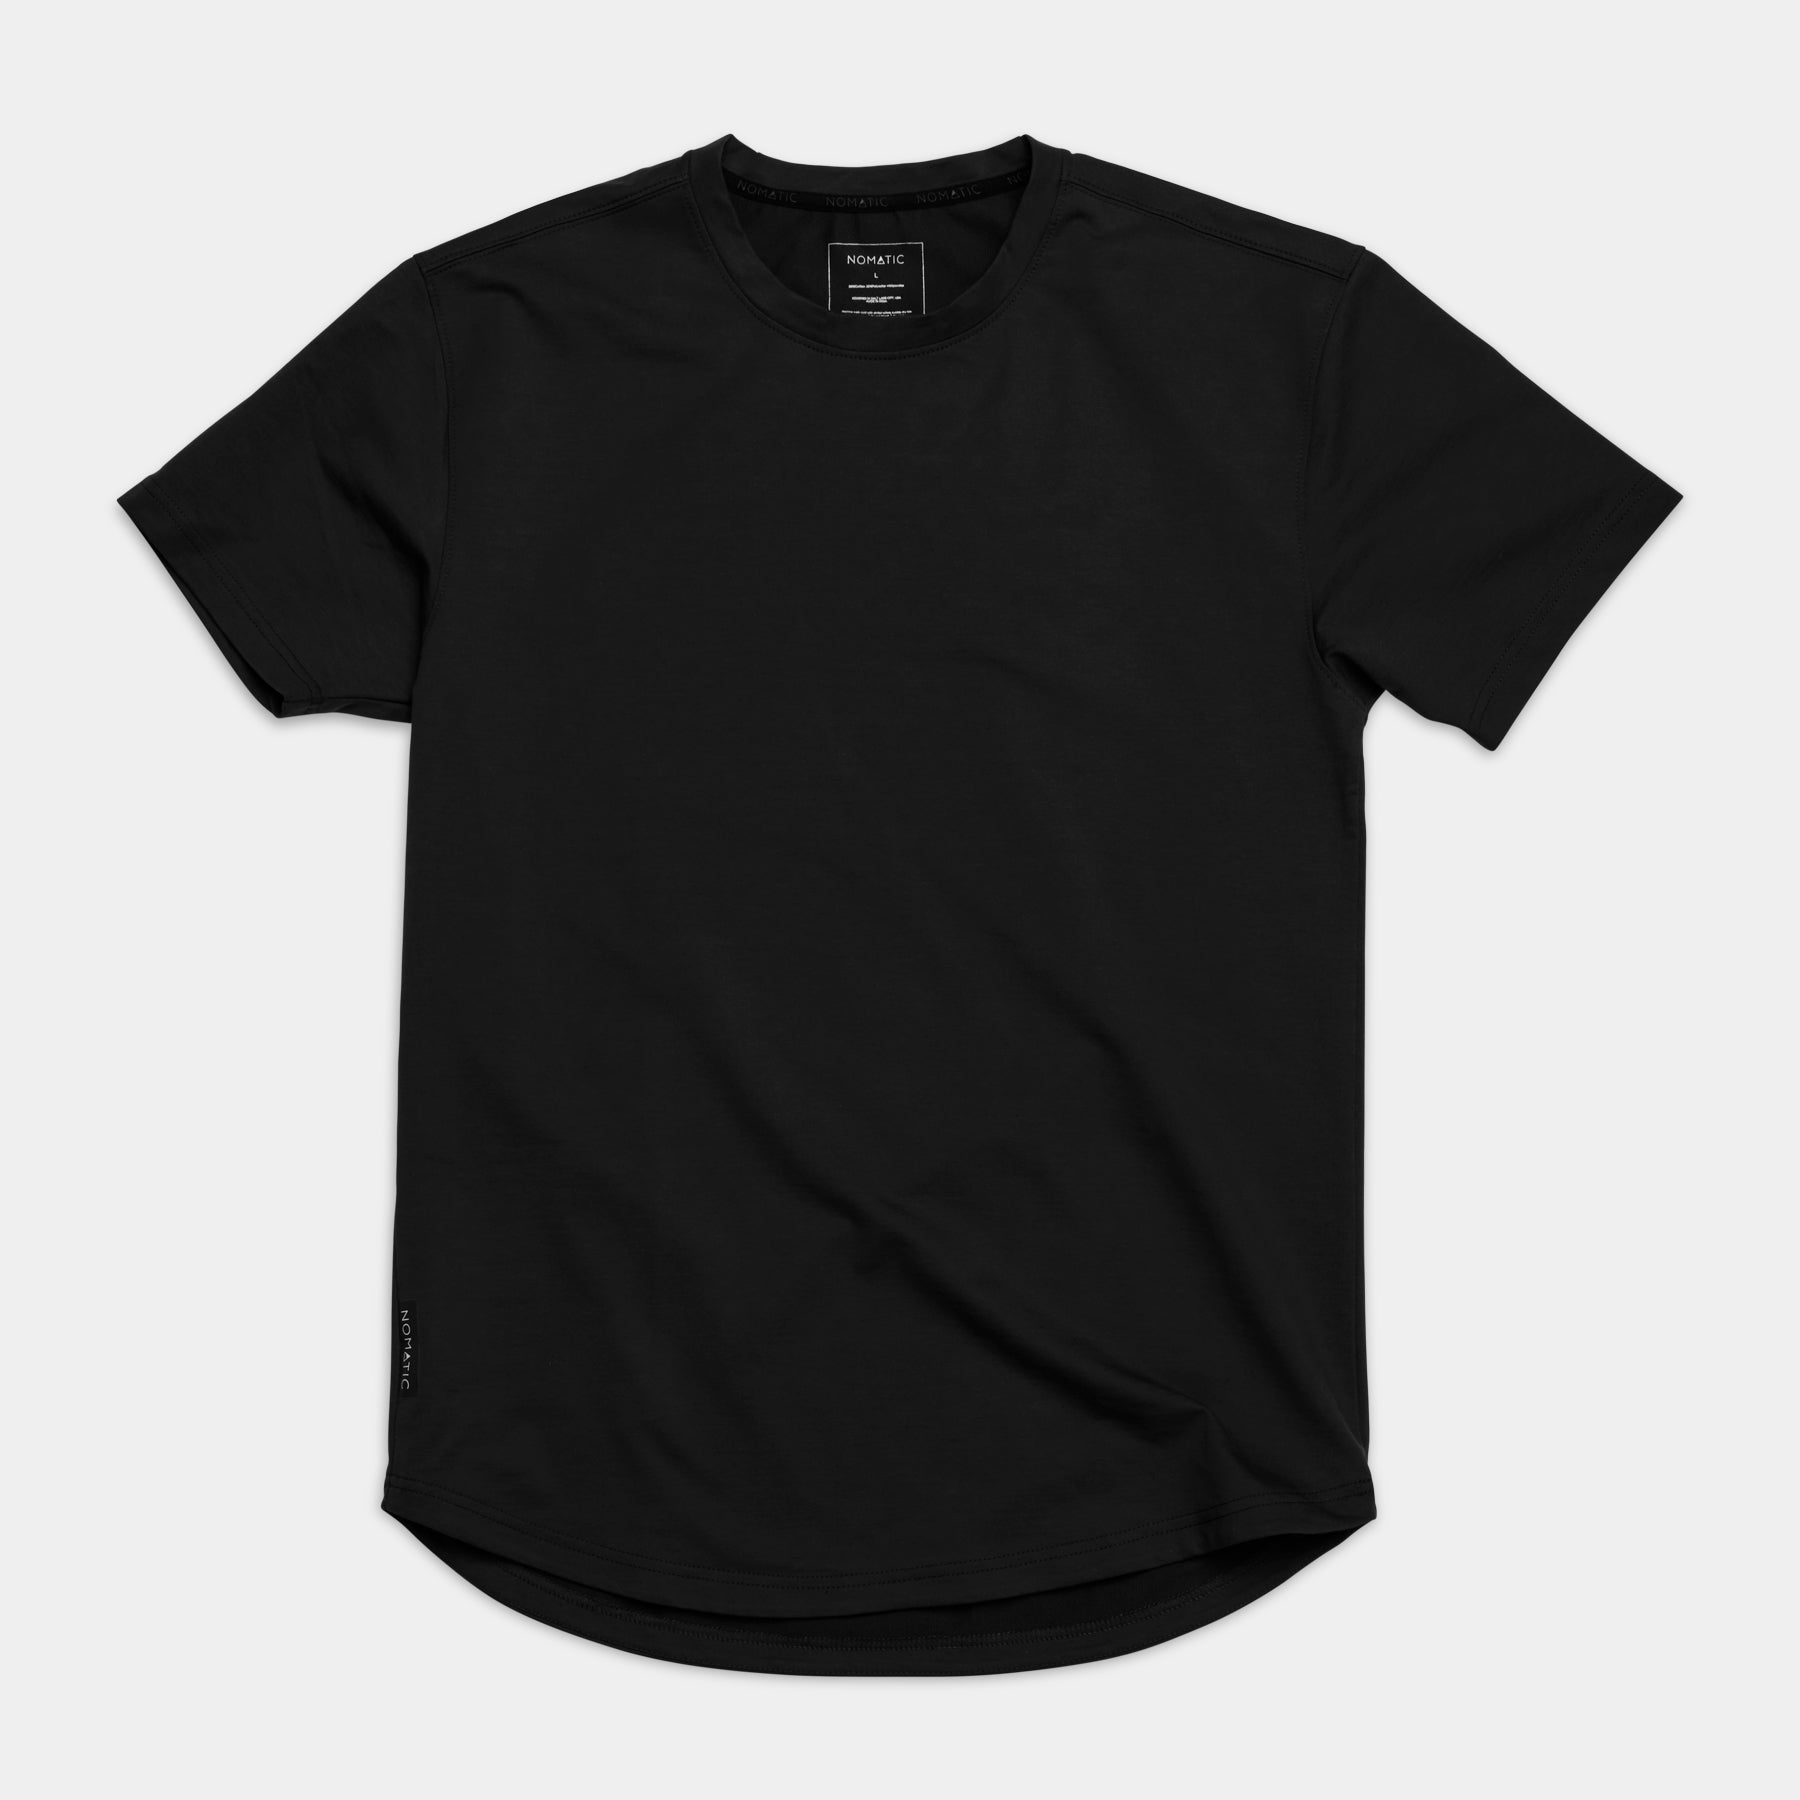 The Outset T-Shirt